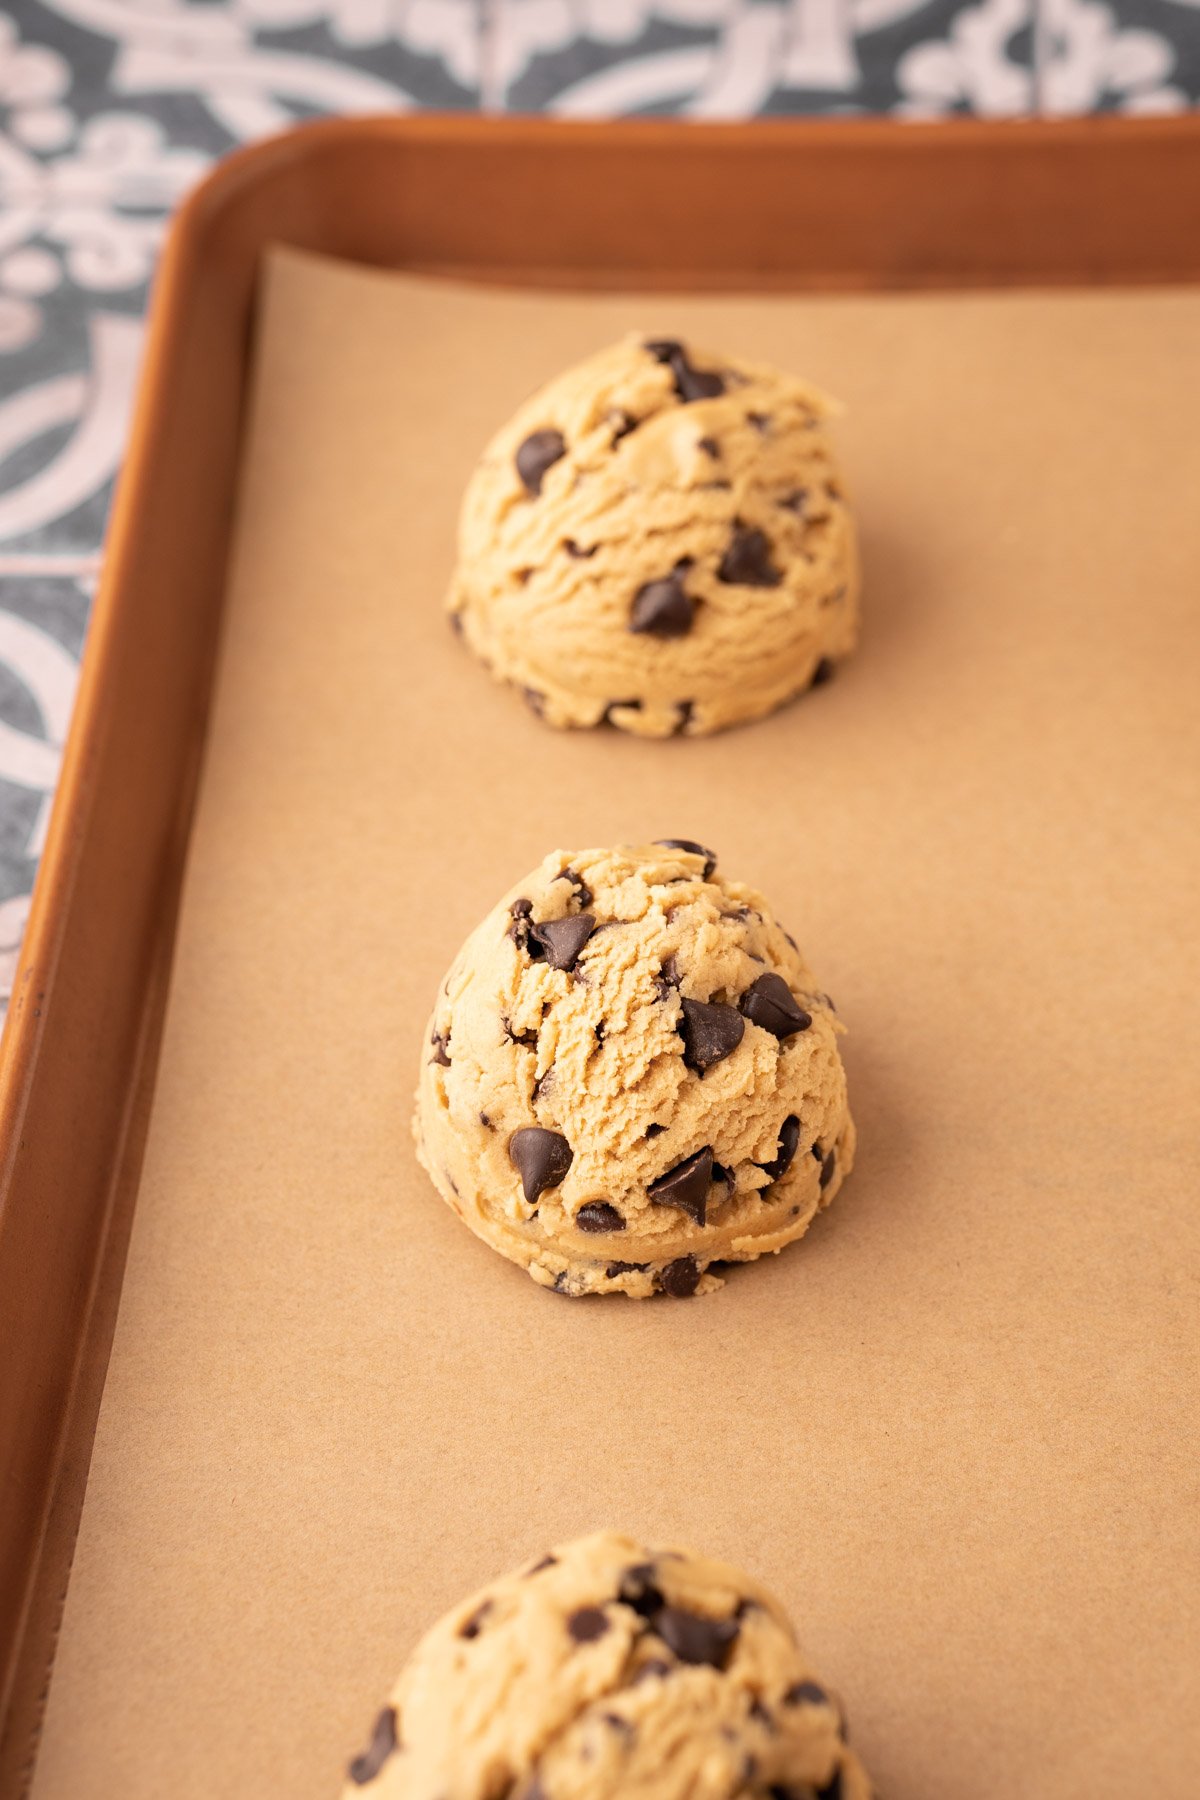 Balls of cookie dough on a parchment lined baking sheet.